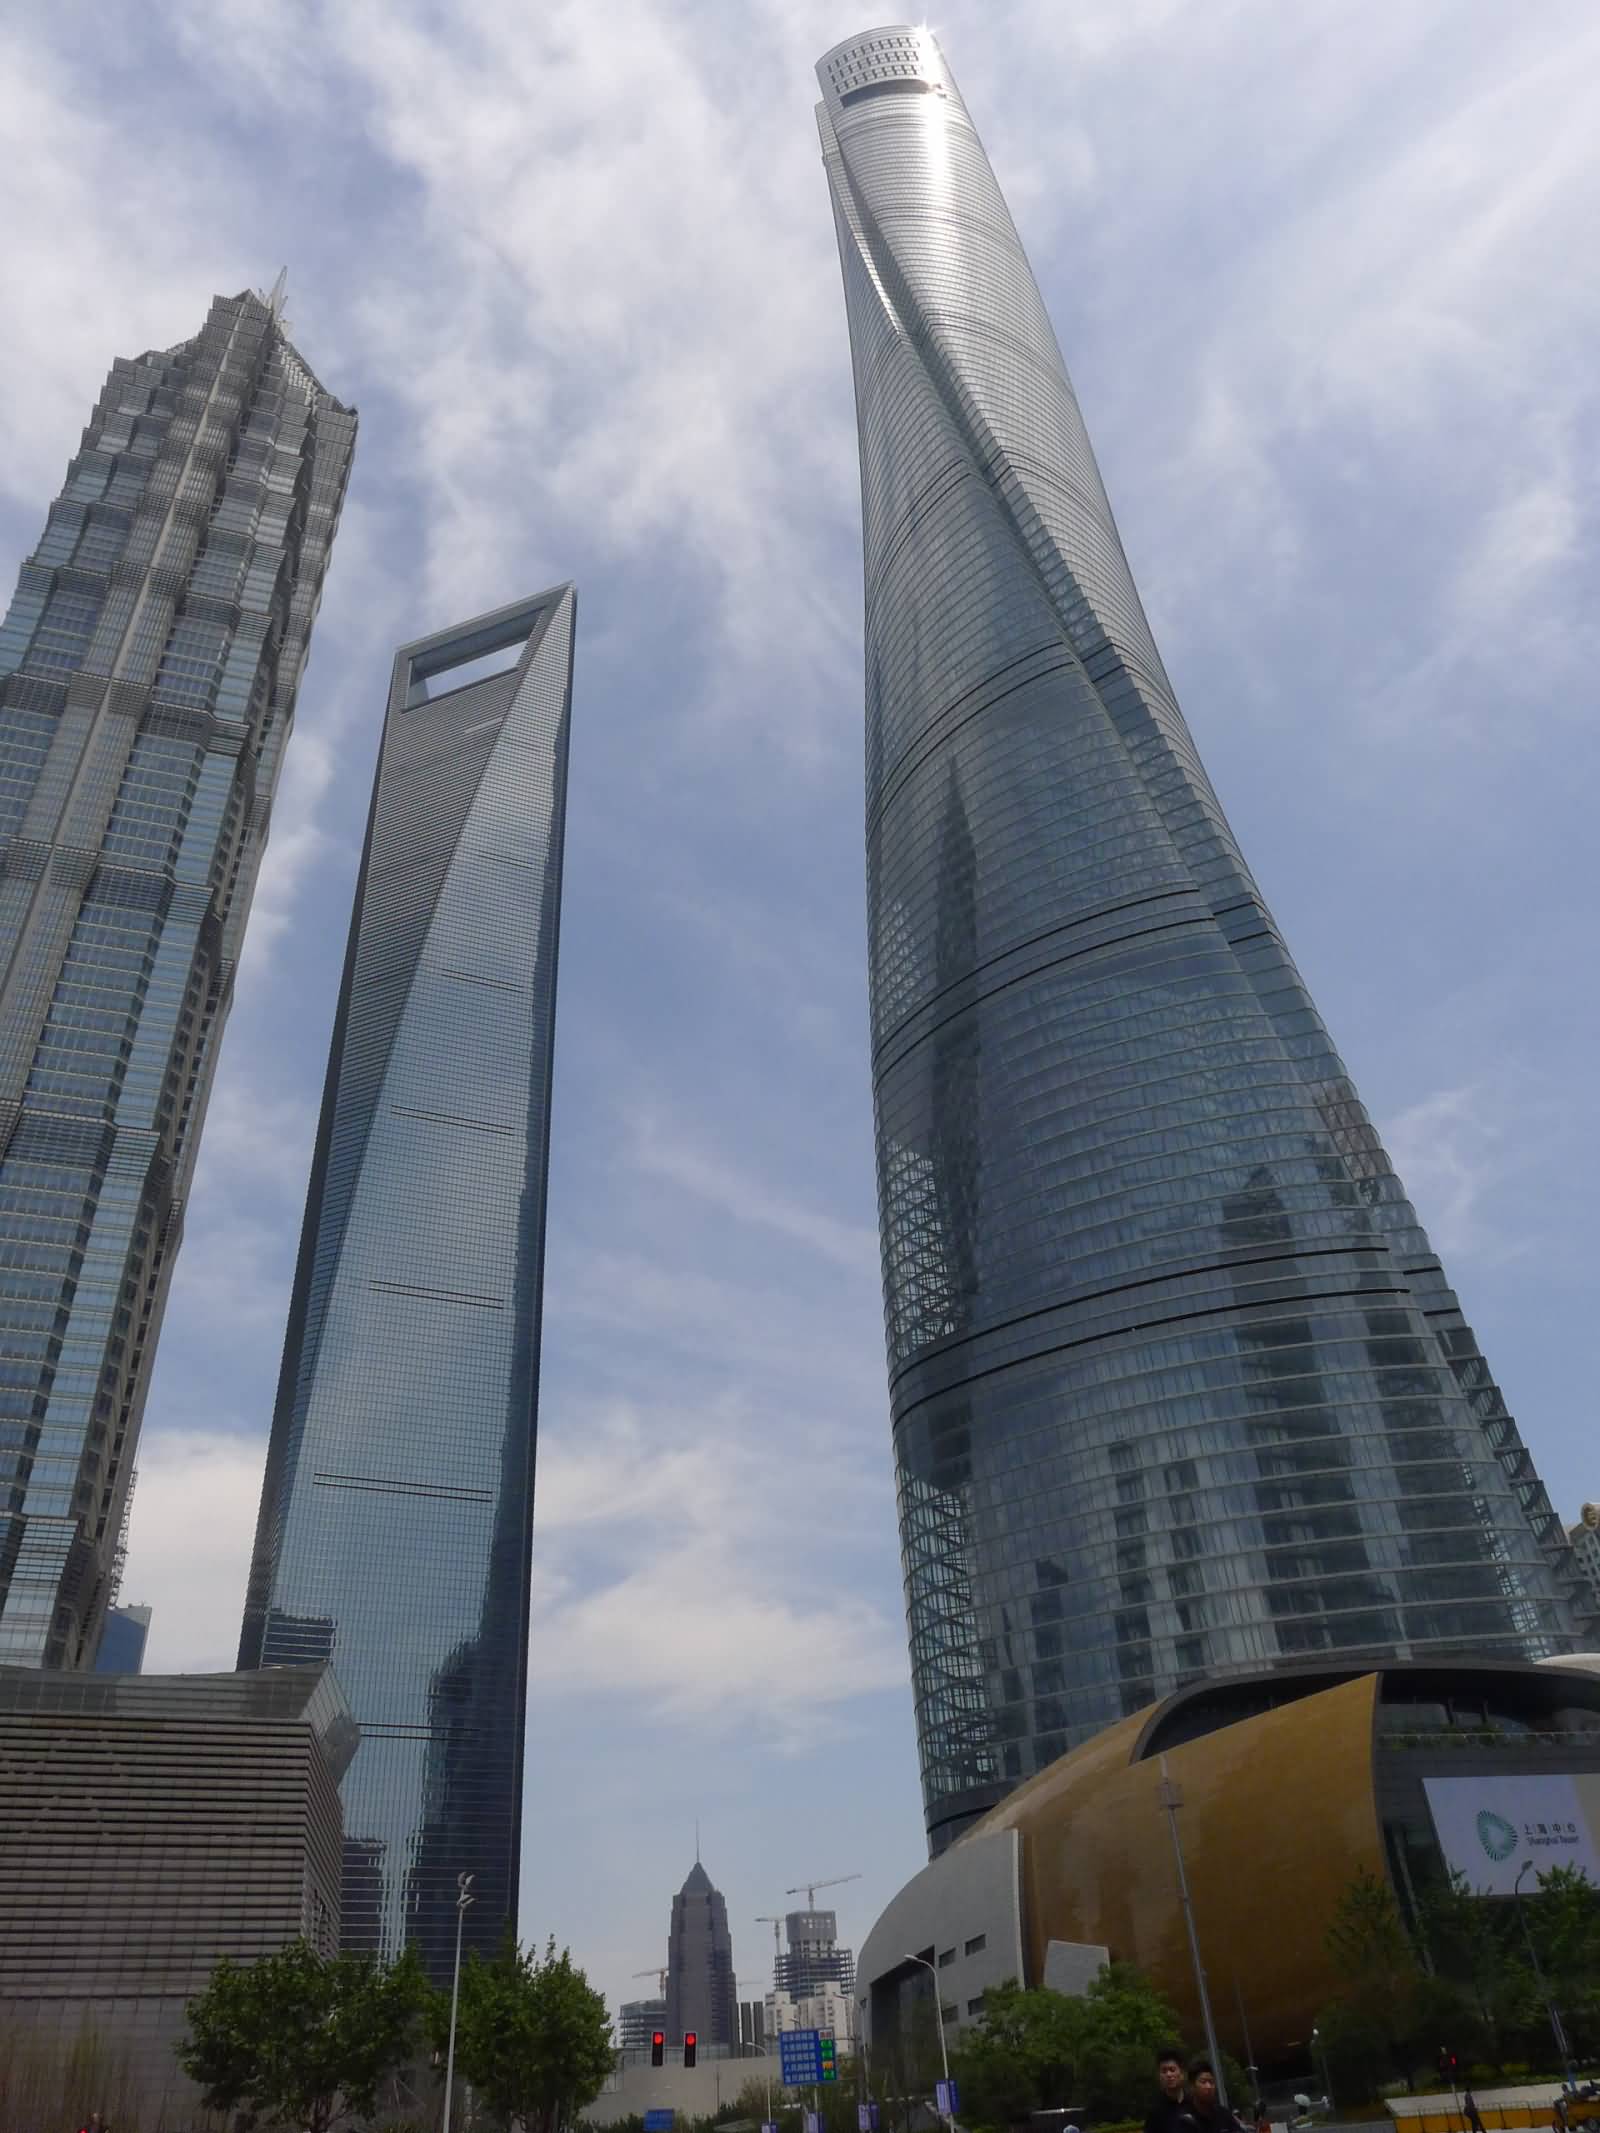 50 Most Amazing Pictures And Photos Of Shanghai Tower In Shanghai, China